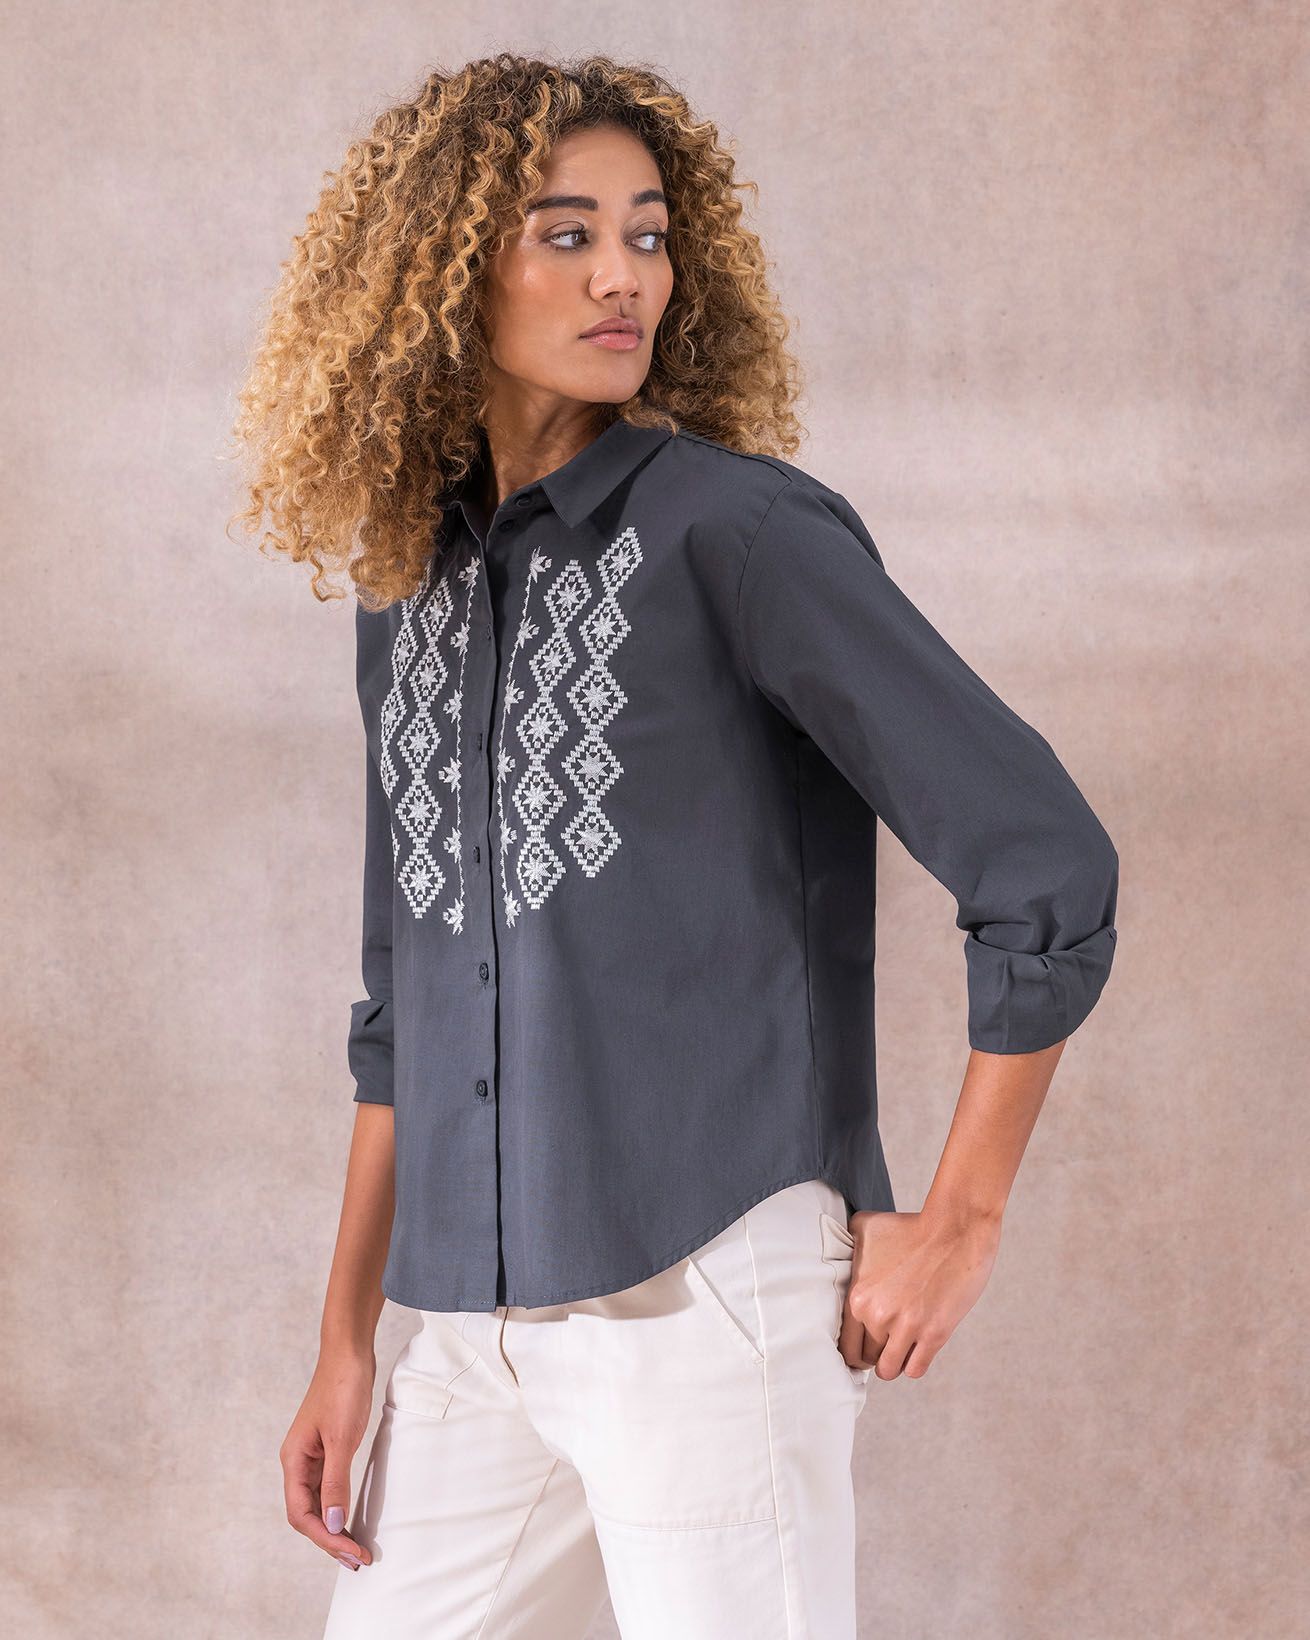 Women's Embroidered Shirts & Blouses